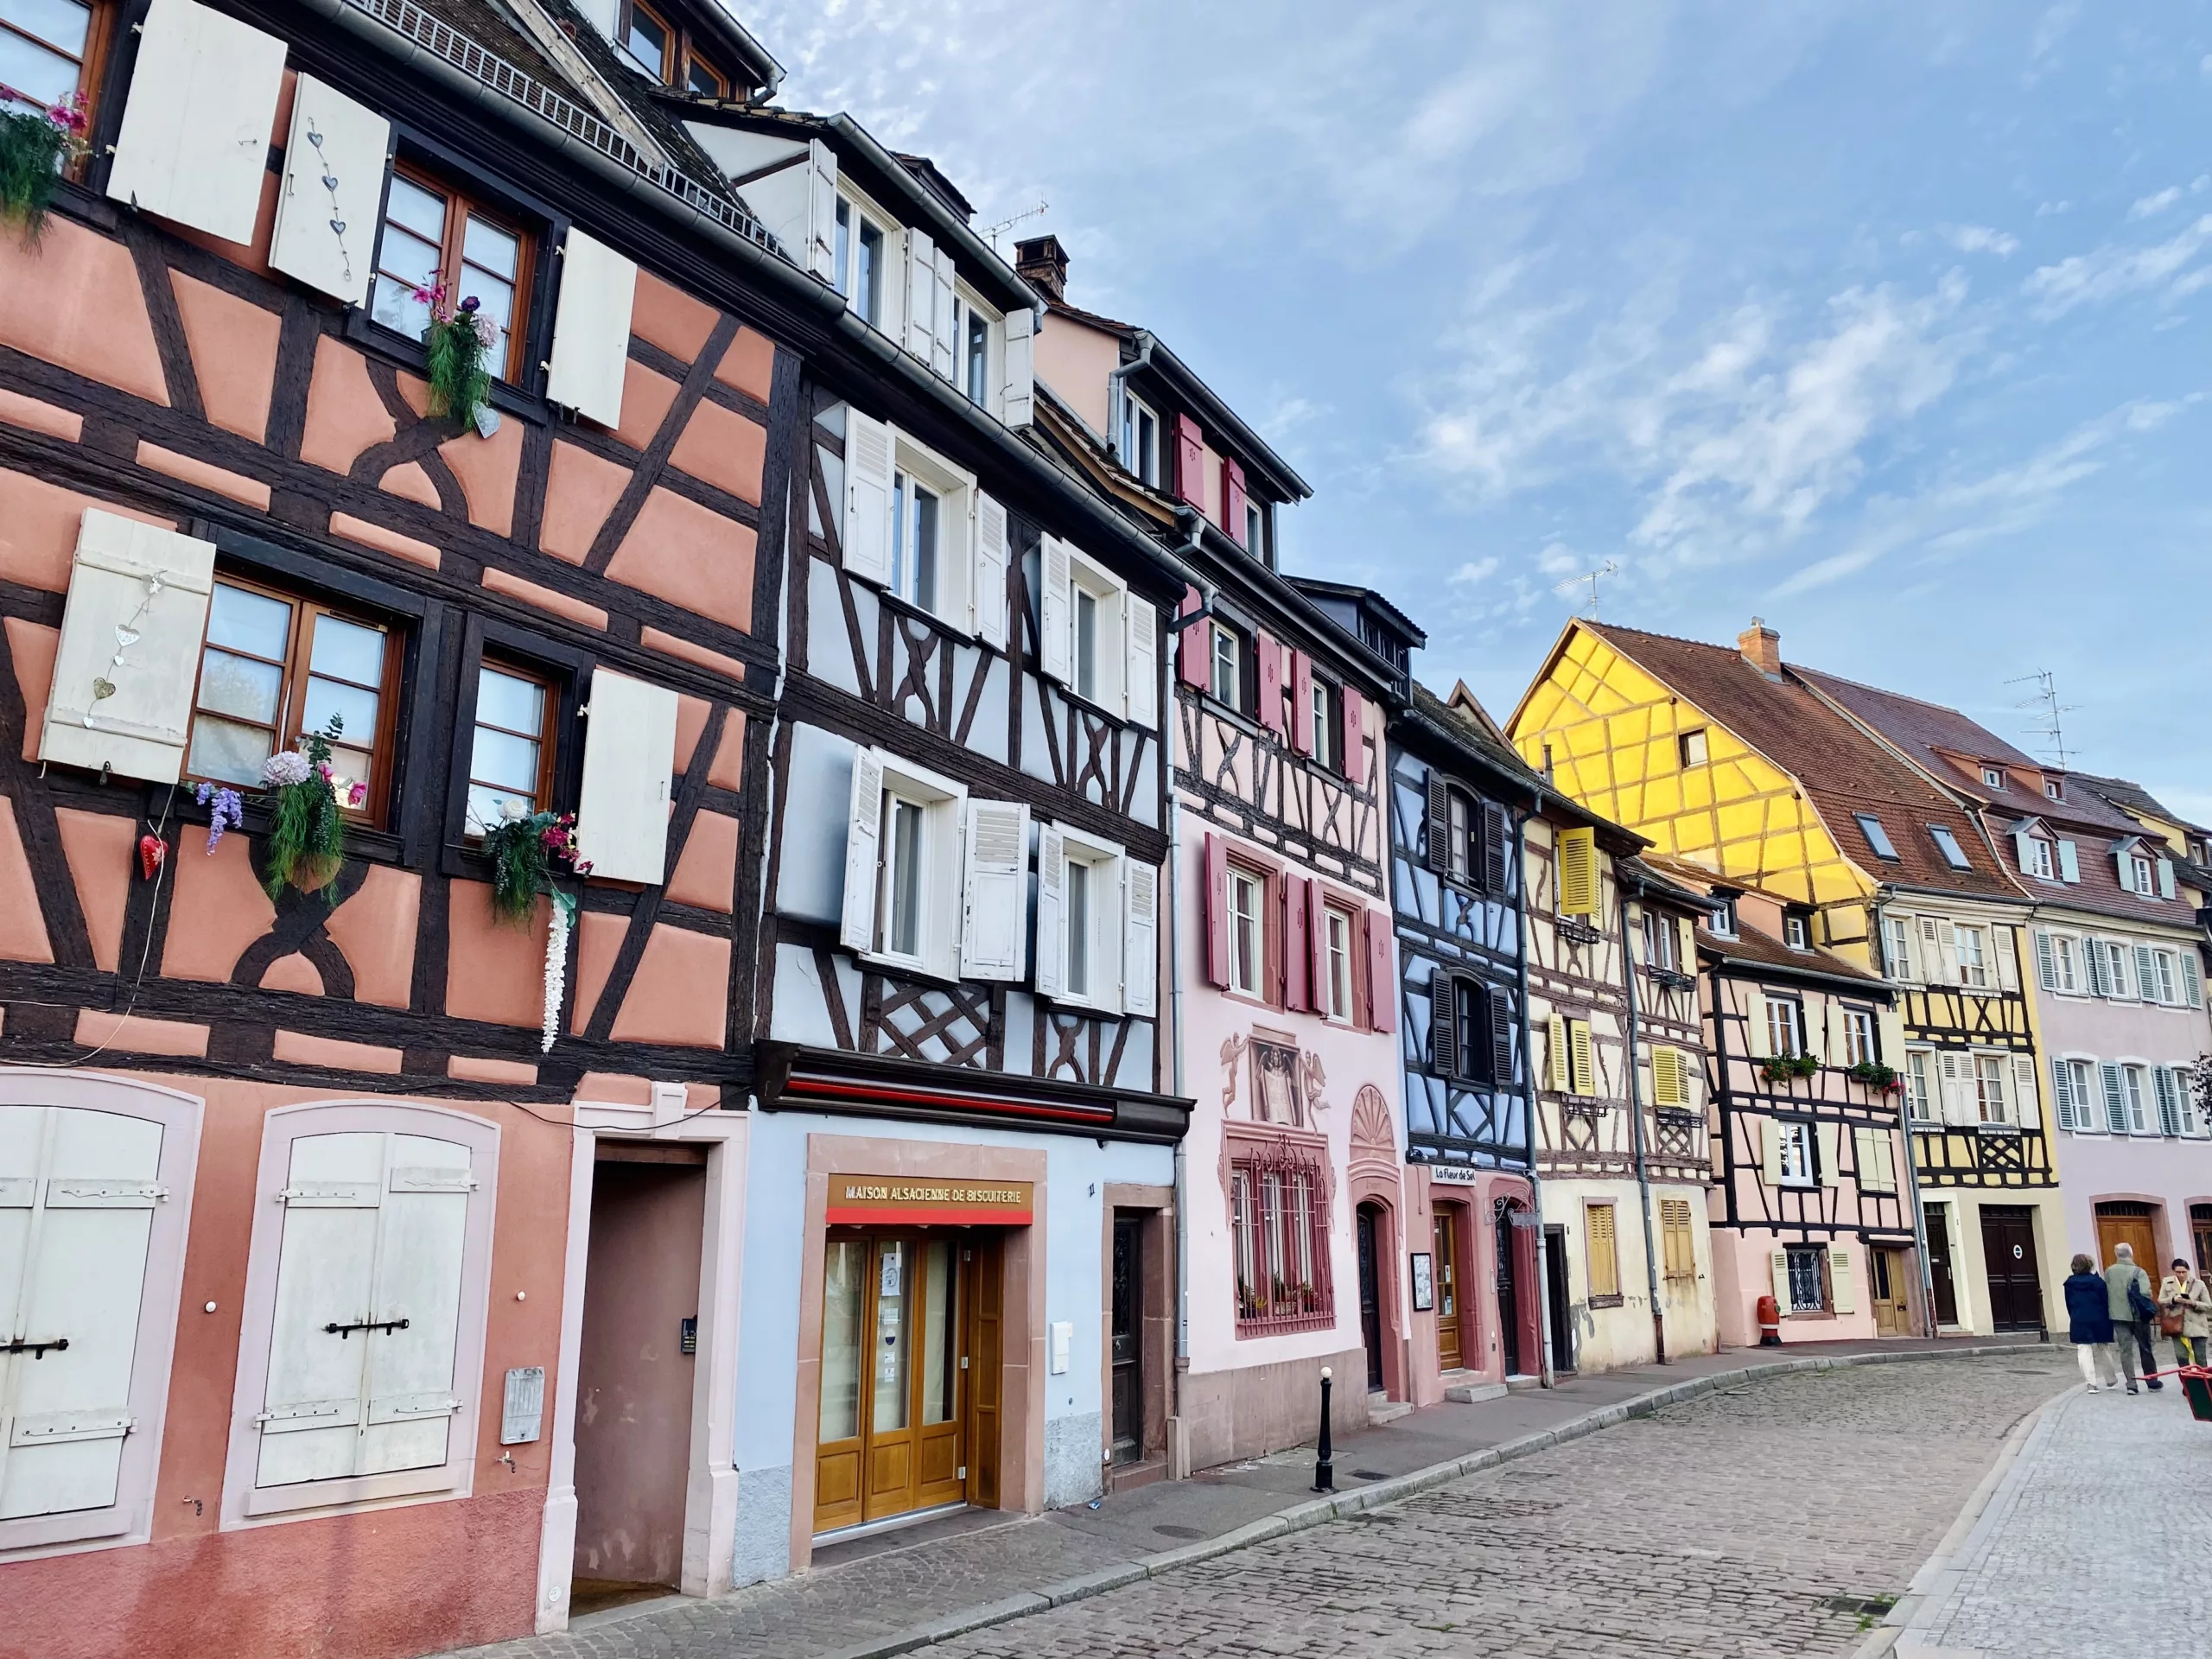 The Fairytale Village of Colmar in Alsace France - they have these beautiful coloured houses.